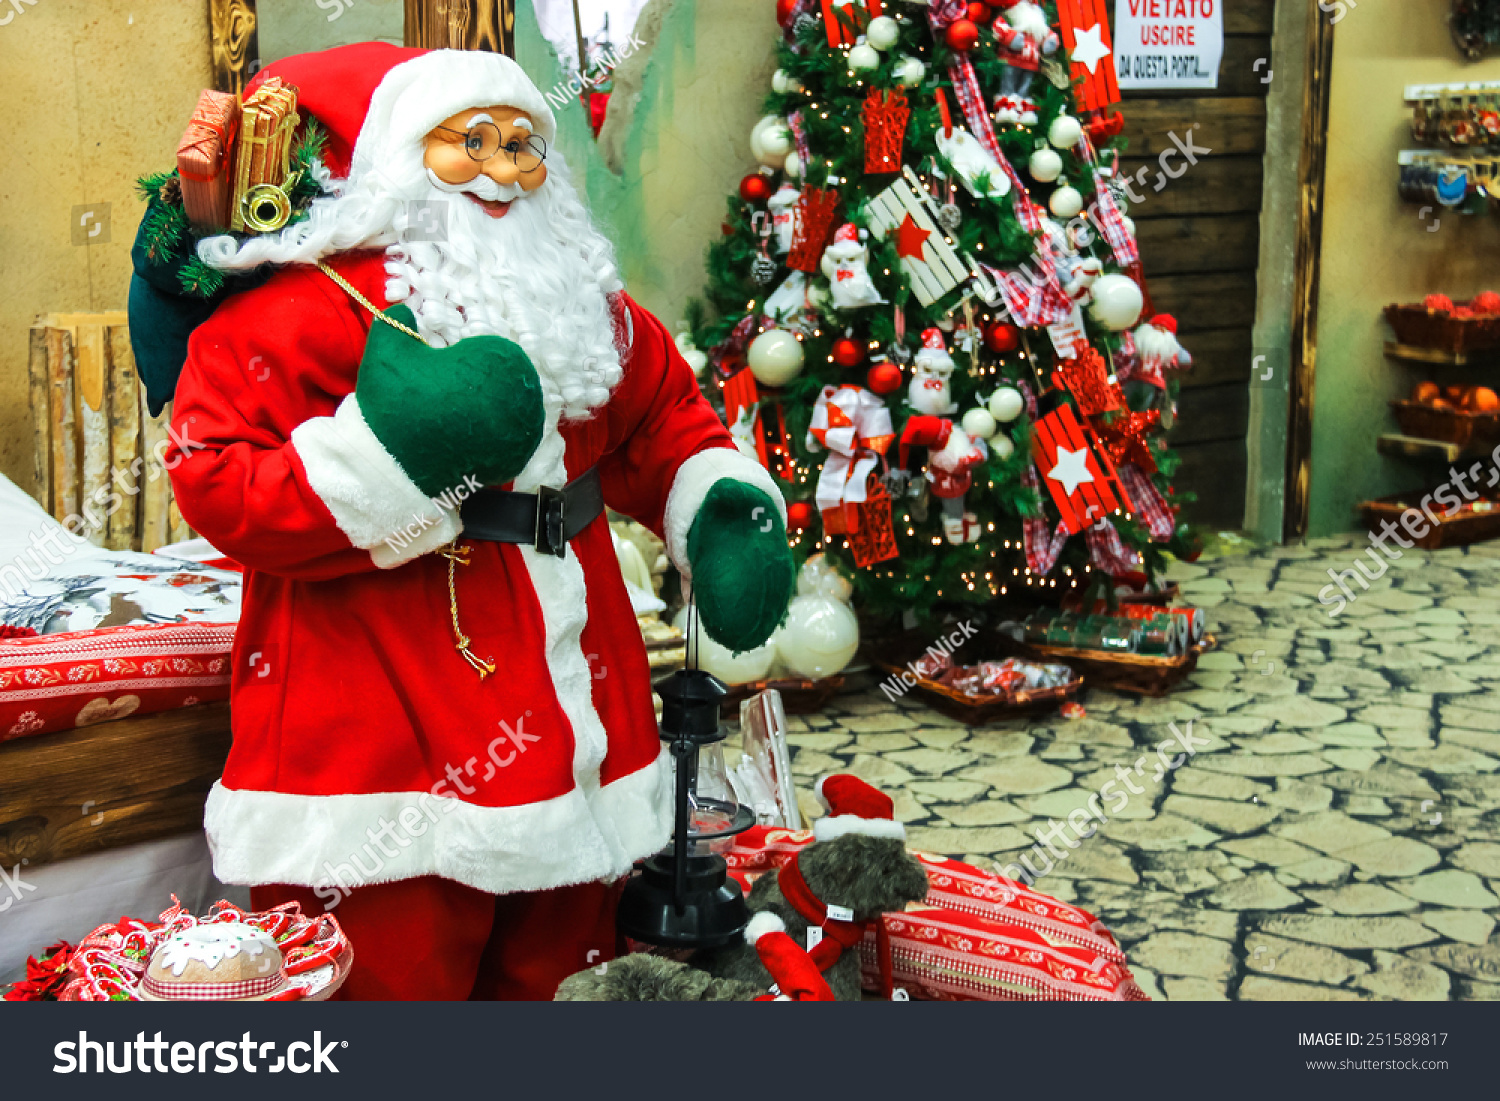 Babbo Natale Italy.Taneto Italy December 27 2014 Great Business Finance Stock Image 251589817